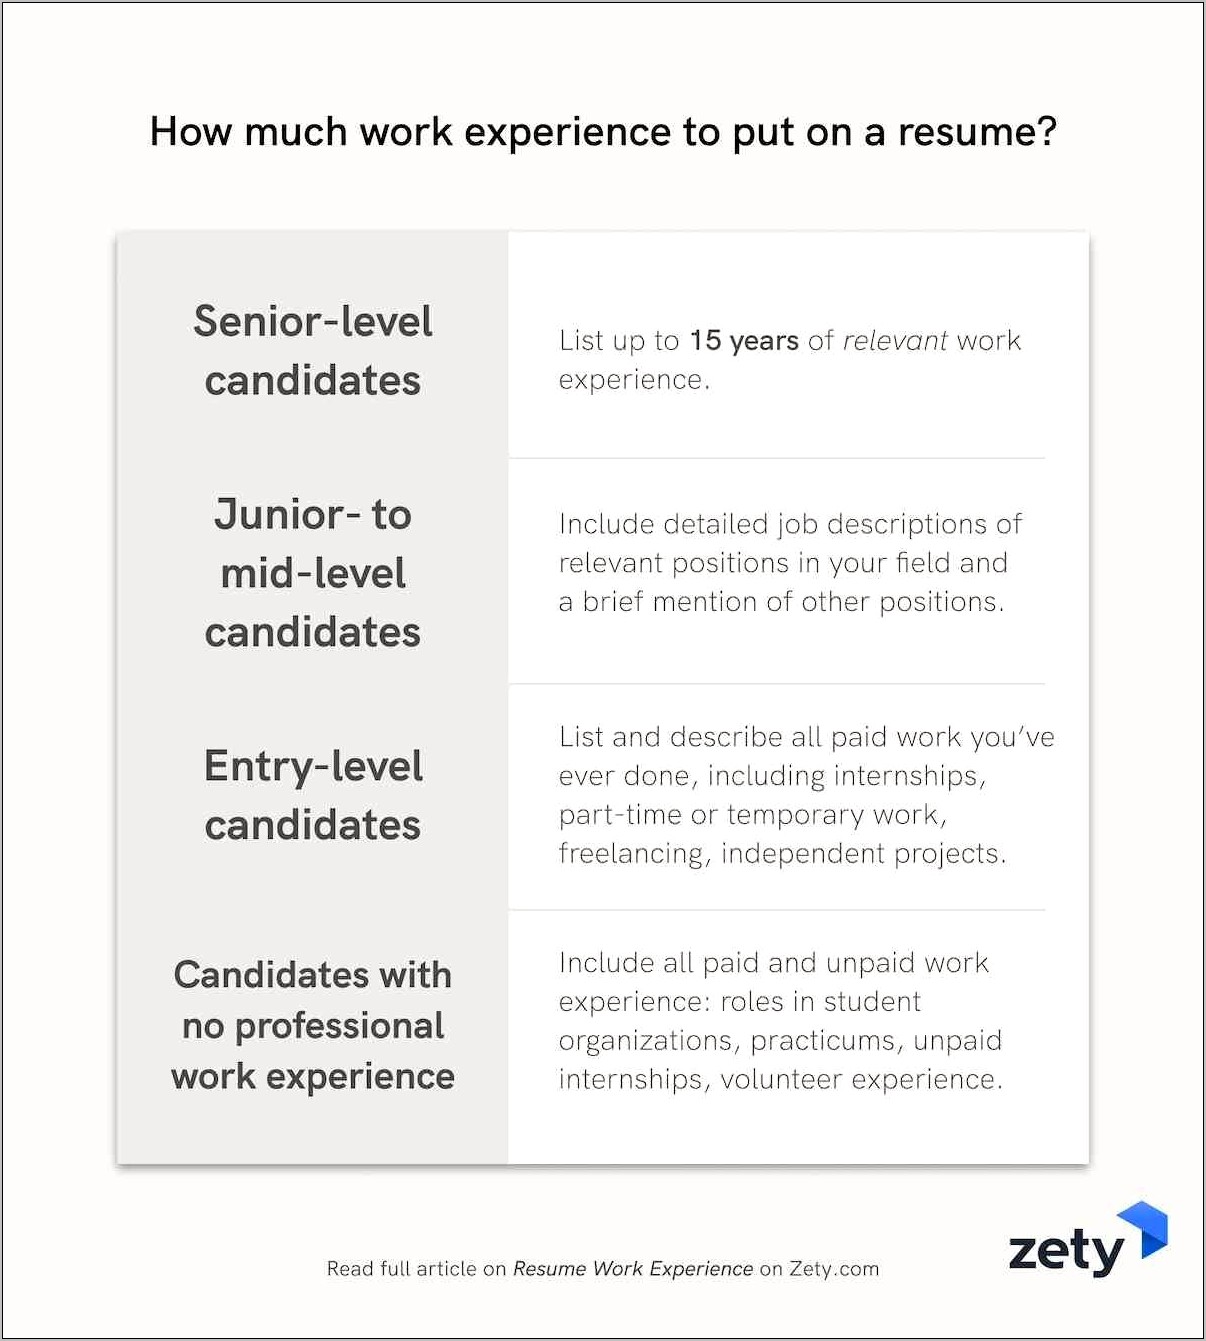 Do You Need Job Experience For A Resume